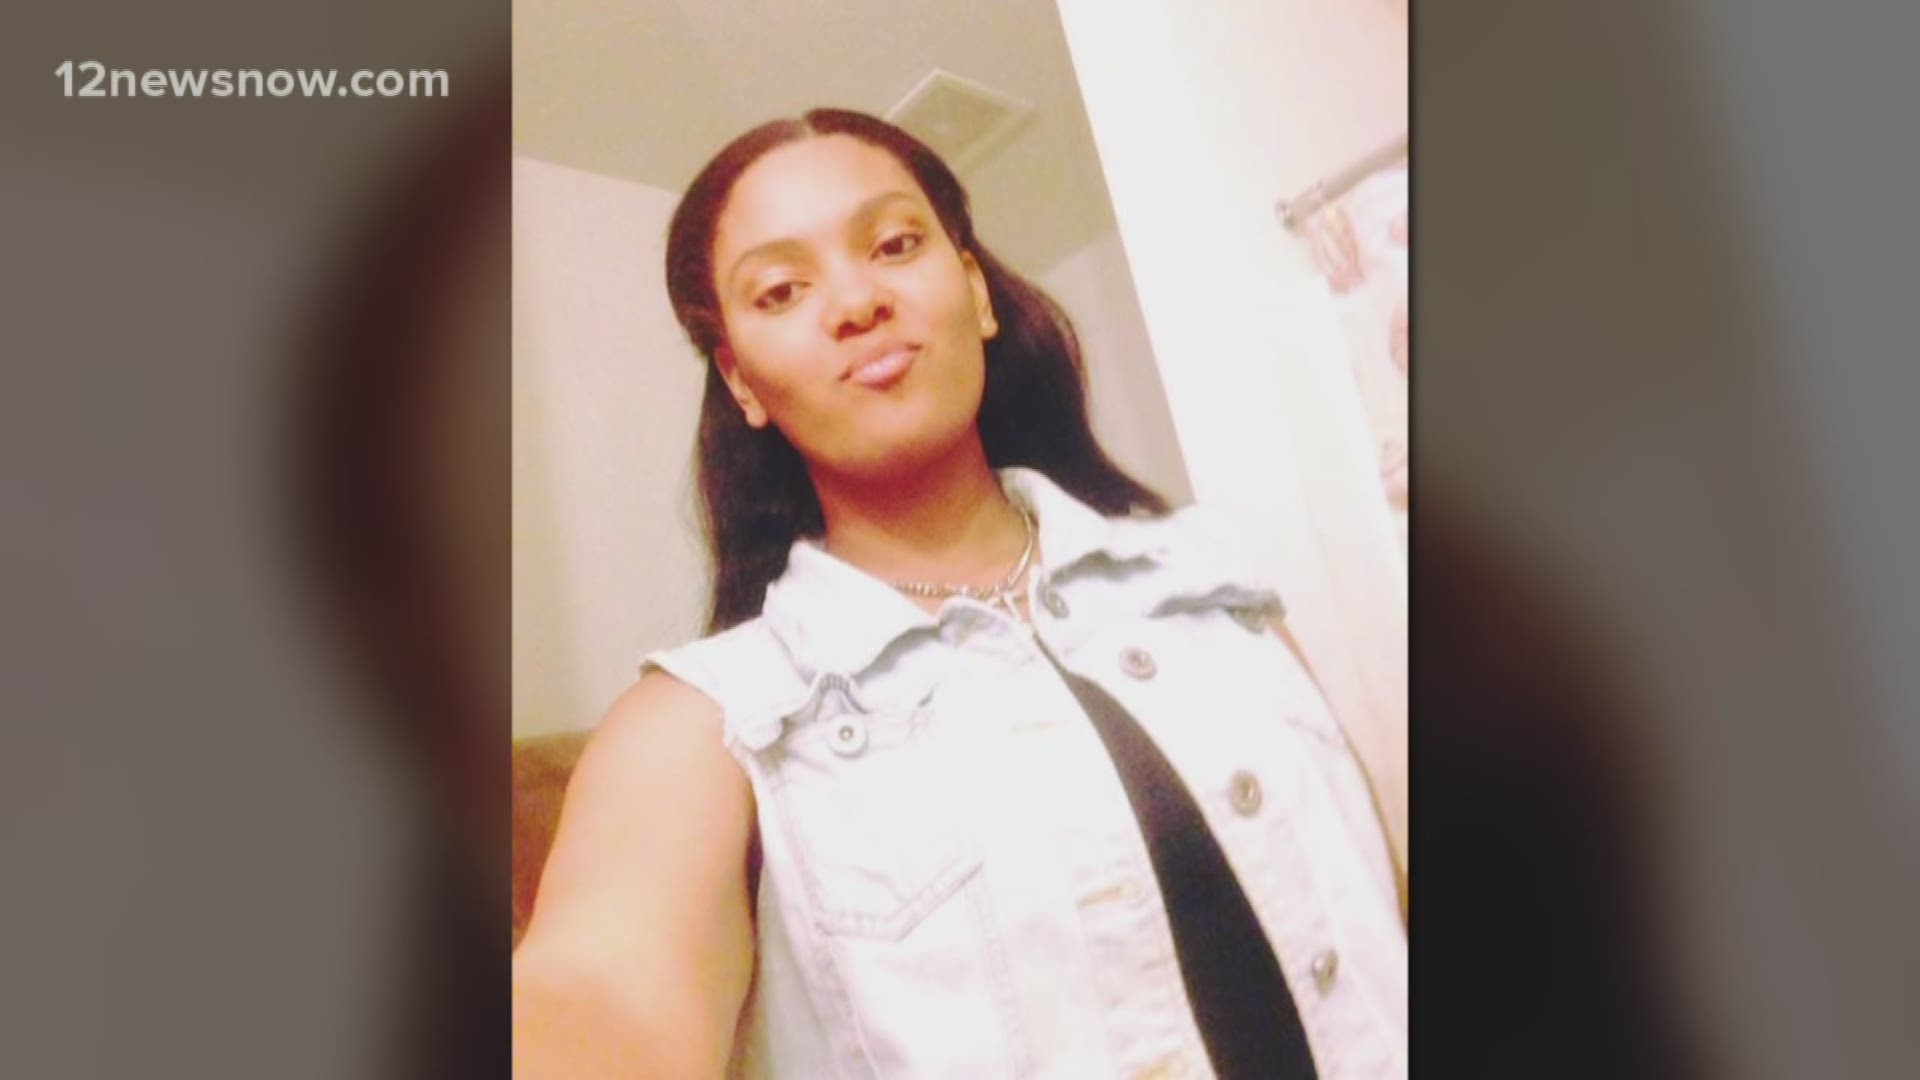 Jasmine Newman was killed early Sunday morning, and Port Arthur police says she was an innocent bystander.